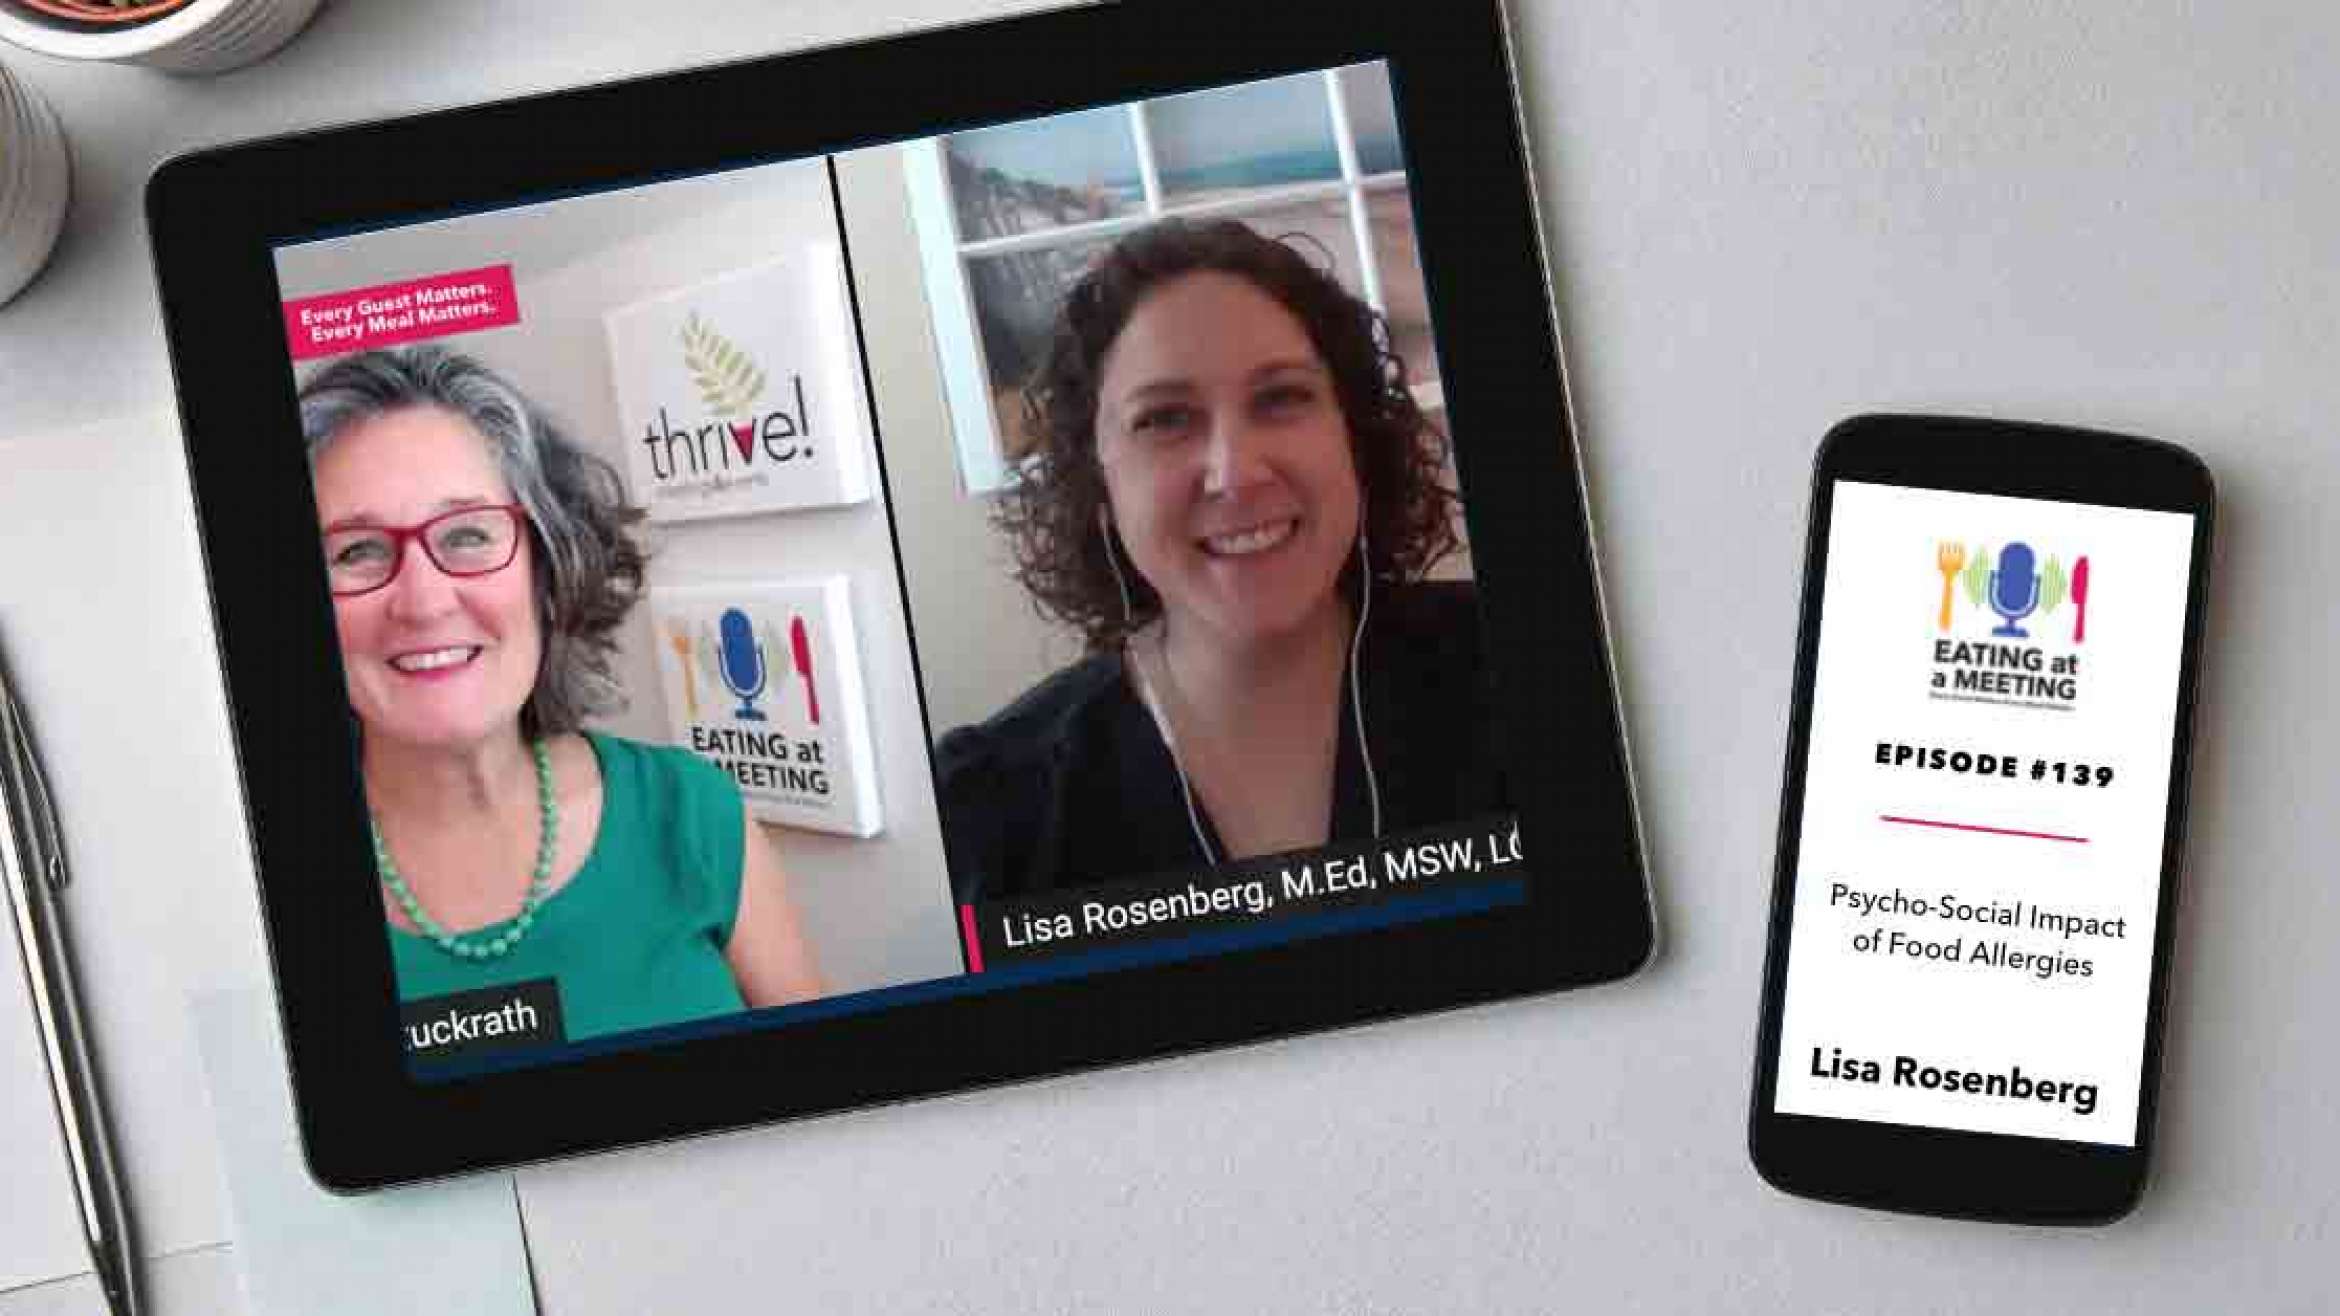 An iPad and iPhone on a table. On the iPad is a picture of two women who are on video screen. On the iphone is the Eating at a Meeting podcast logo with Episode #139 Psycho-Social Impact of Food Allergies with Lisa Rosenberg